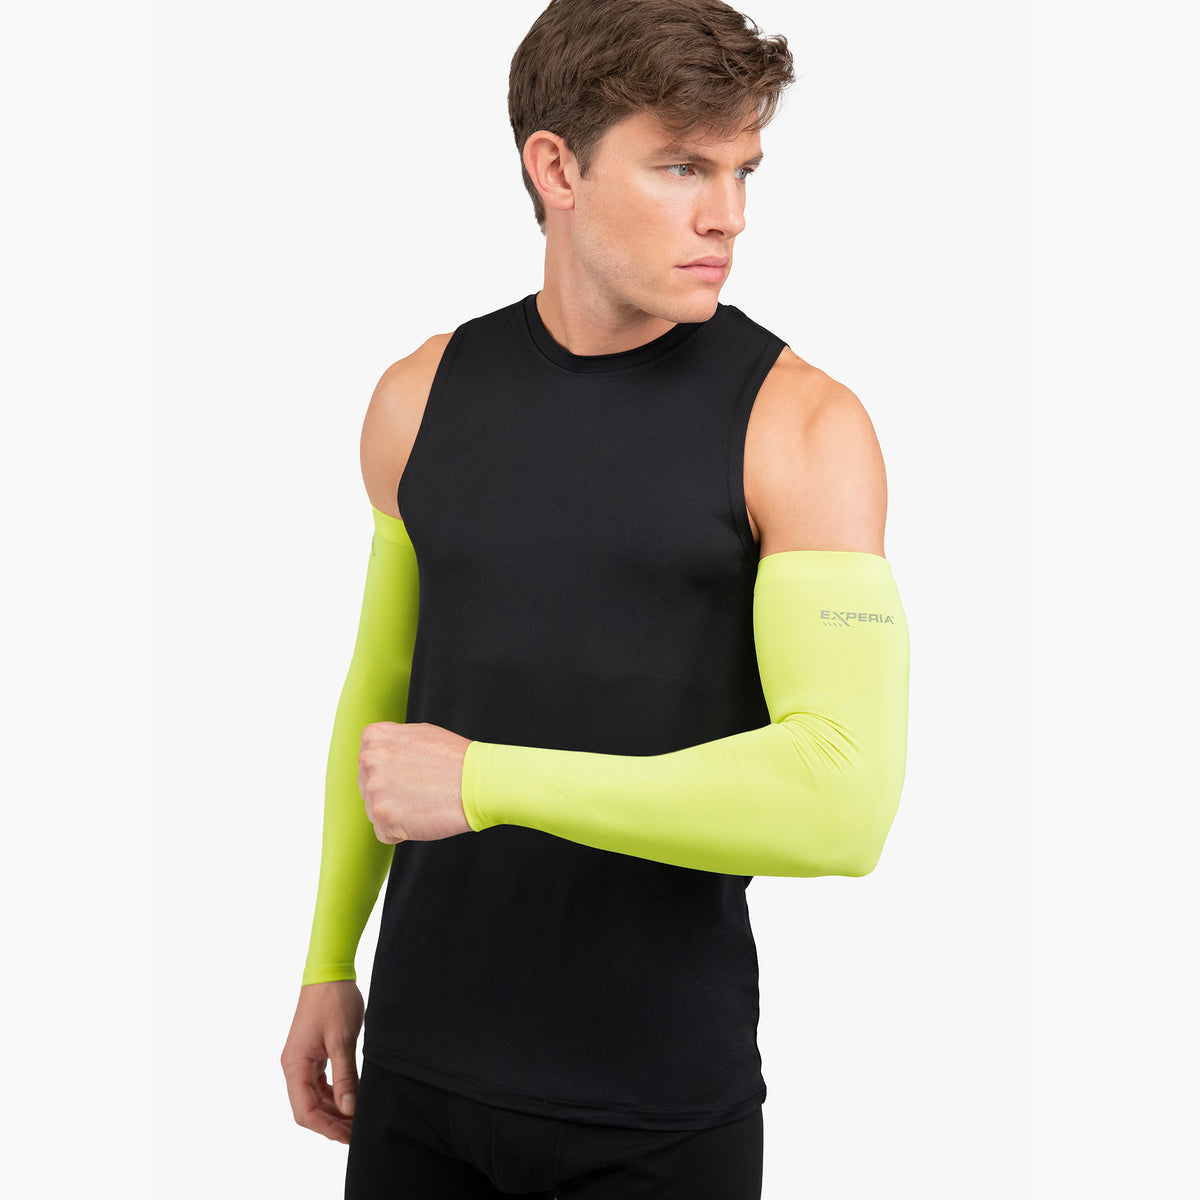 Experia - Performance Running Arm Sleeves